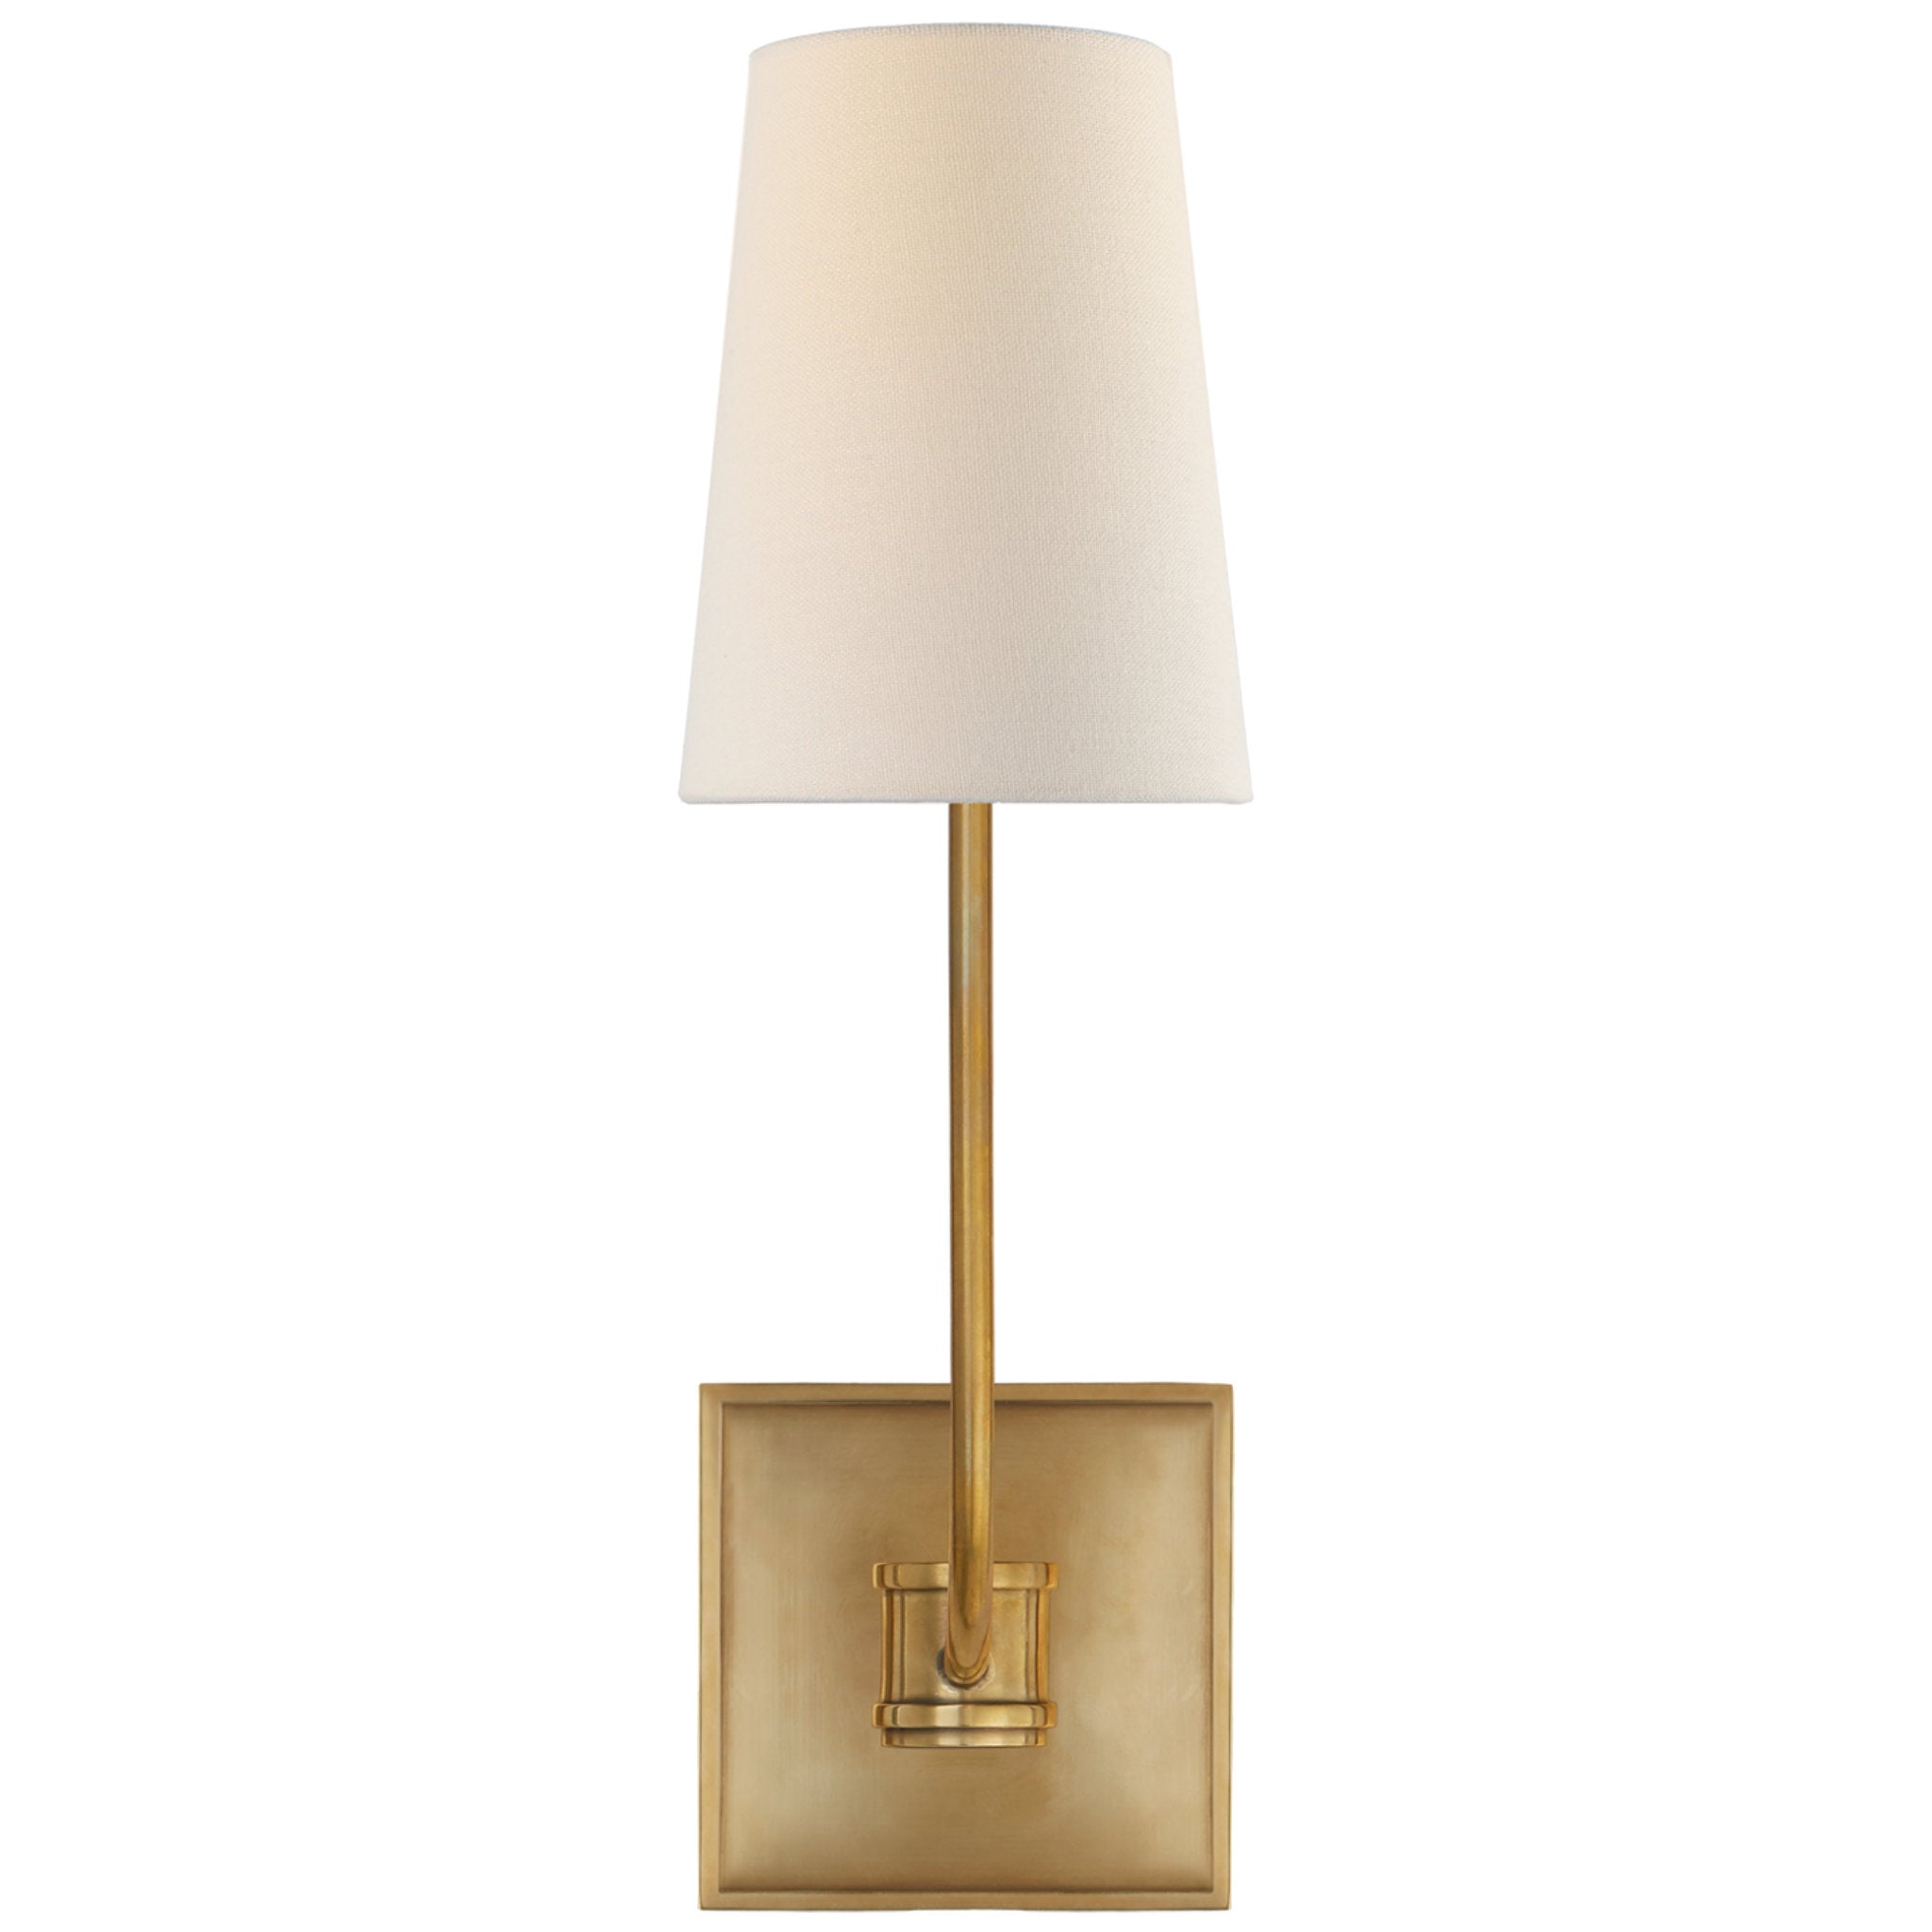 Chapman & Myers Venini Single Sconce in Antique-Burnished Brass with Linen Shade